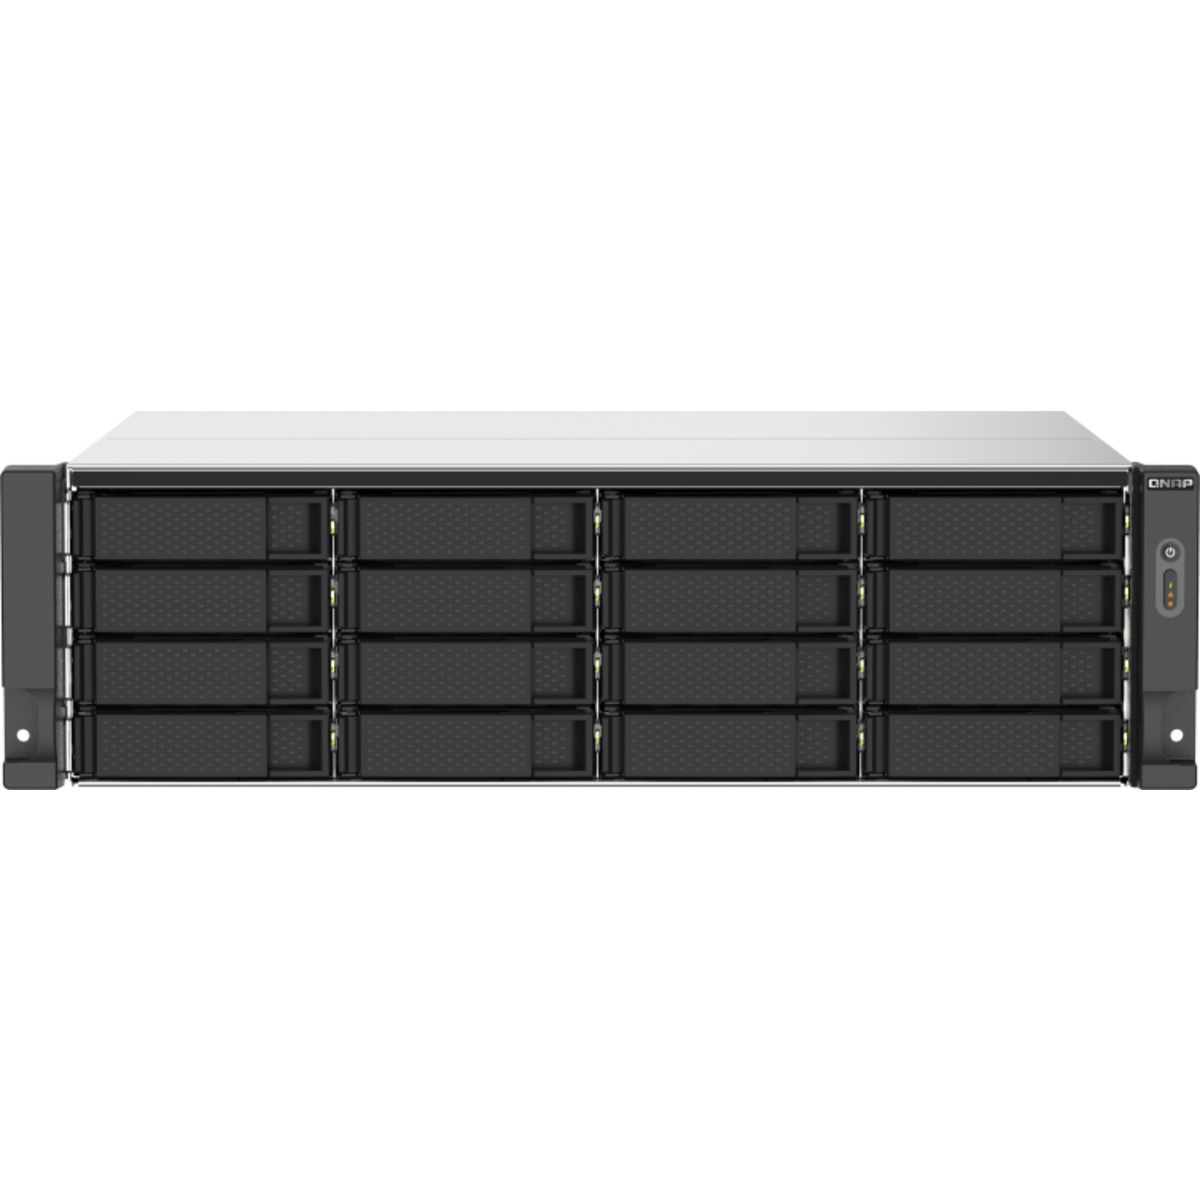 QNAP TS-1673AU-RP 208tb 16-Bay RackMount Multimedia / Power User / Business NAS - Network Attached Storage Device 13x16tb Seagate IronWolf Pro ST16000NT001 3.5 7200rpm SATA 6Gb/s HDD NAS Class Drives Installed - Burn-In Tested - ON SALE - FREE RAM UPGRADE TS-1673AU-RP